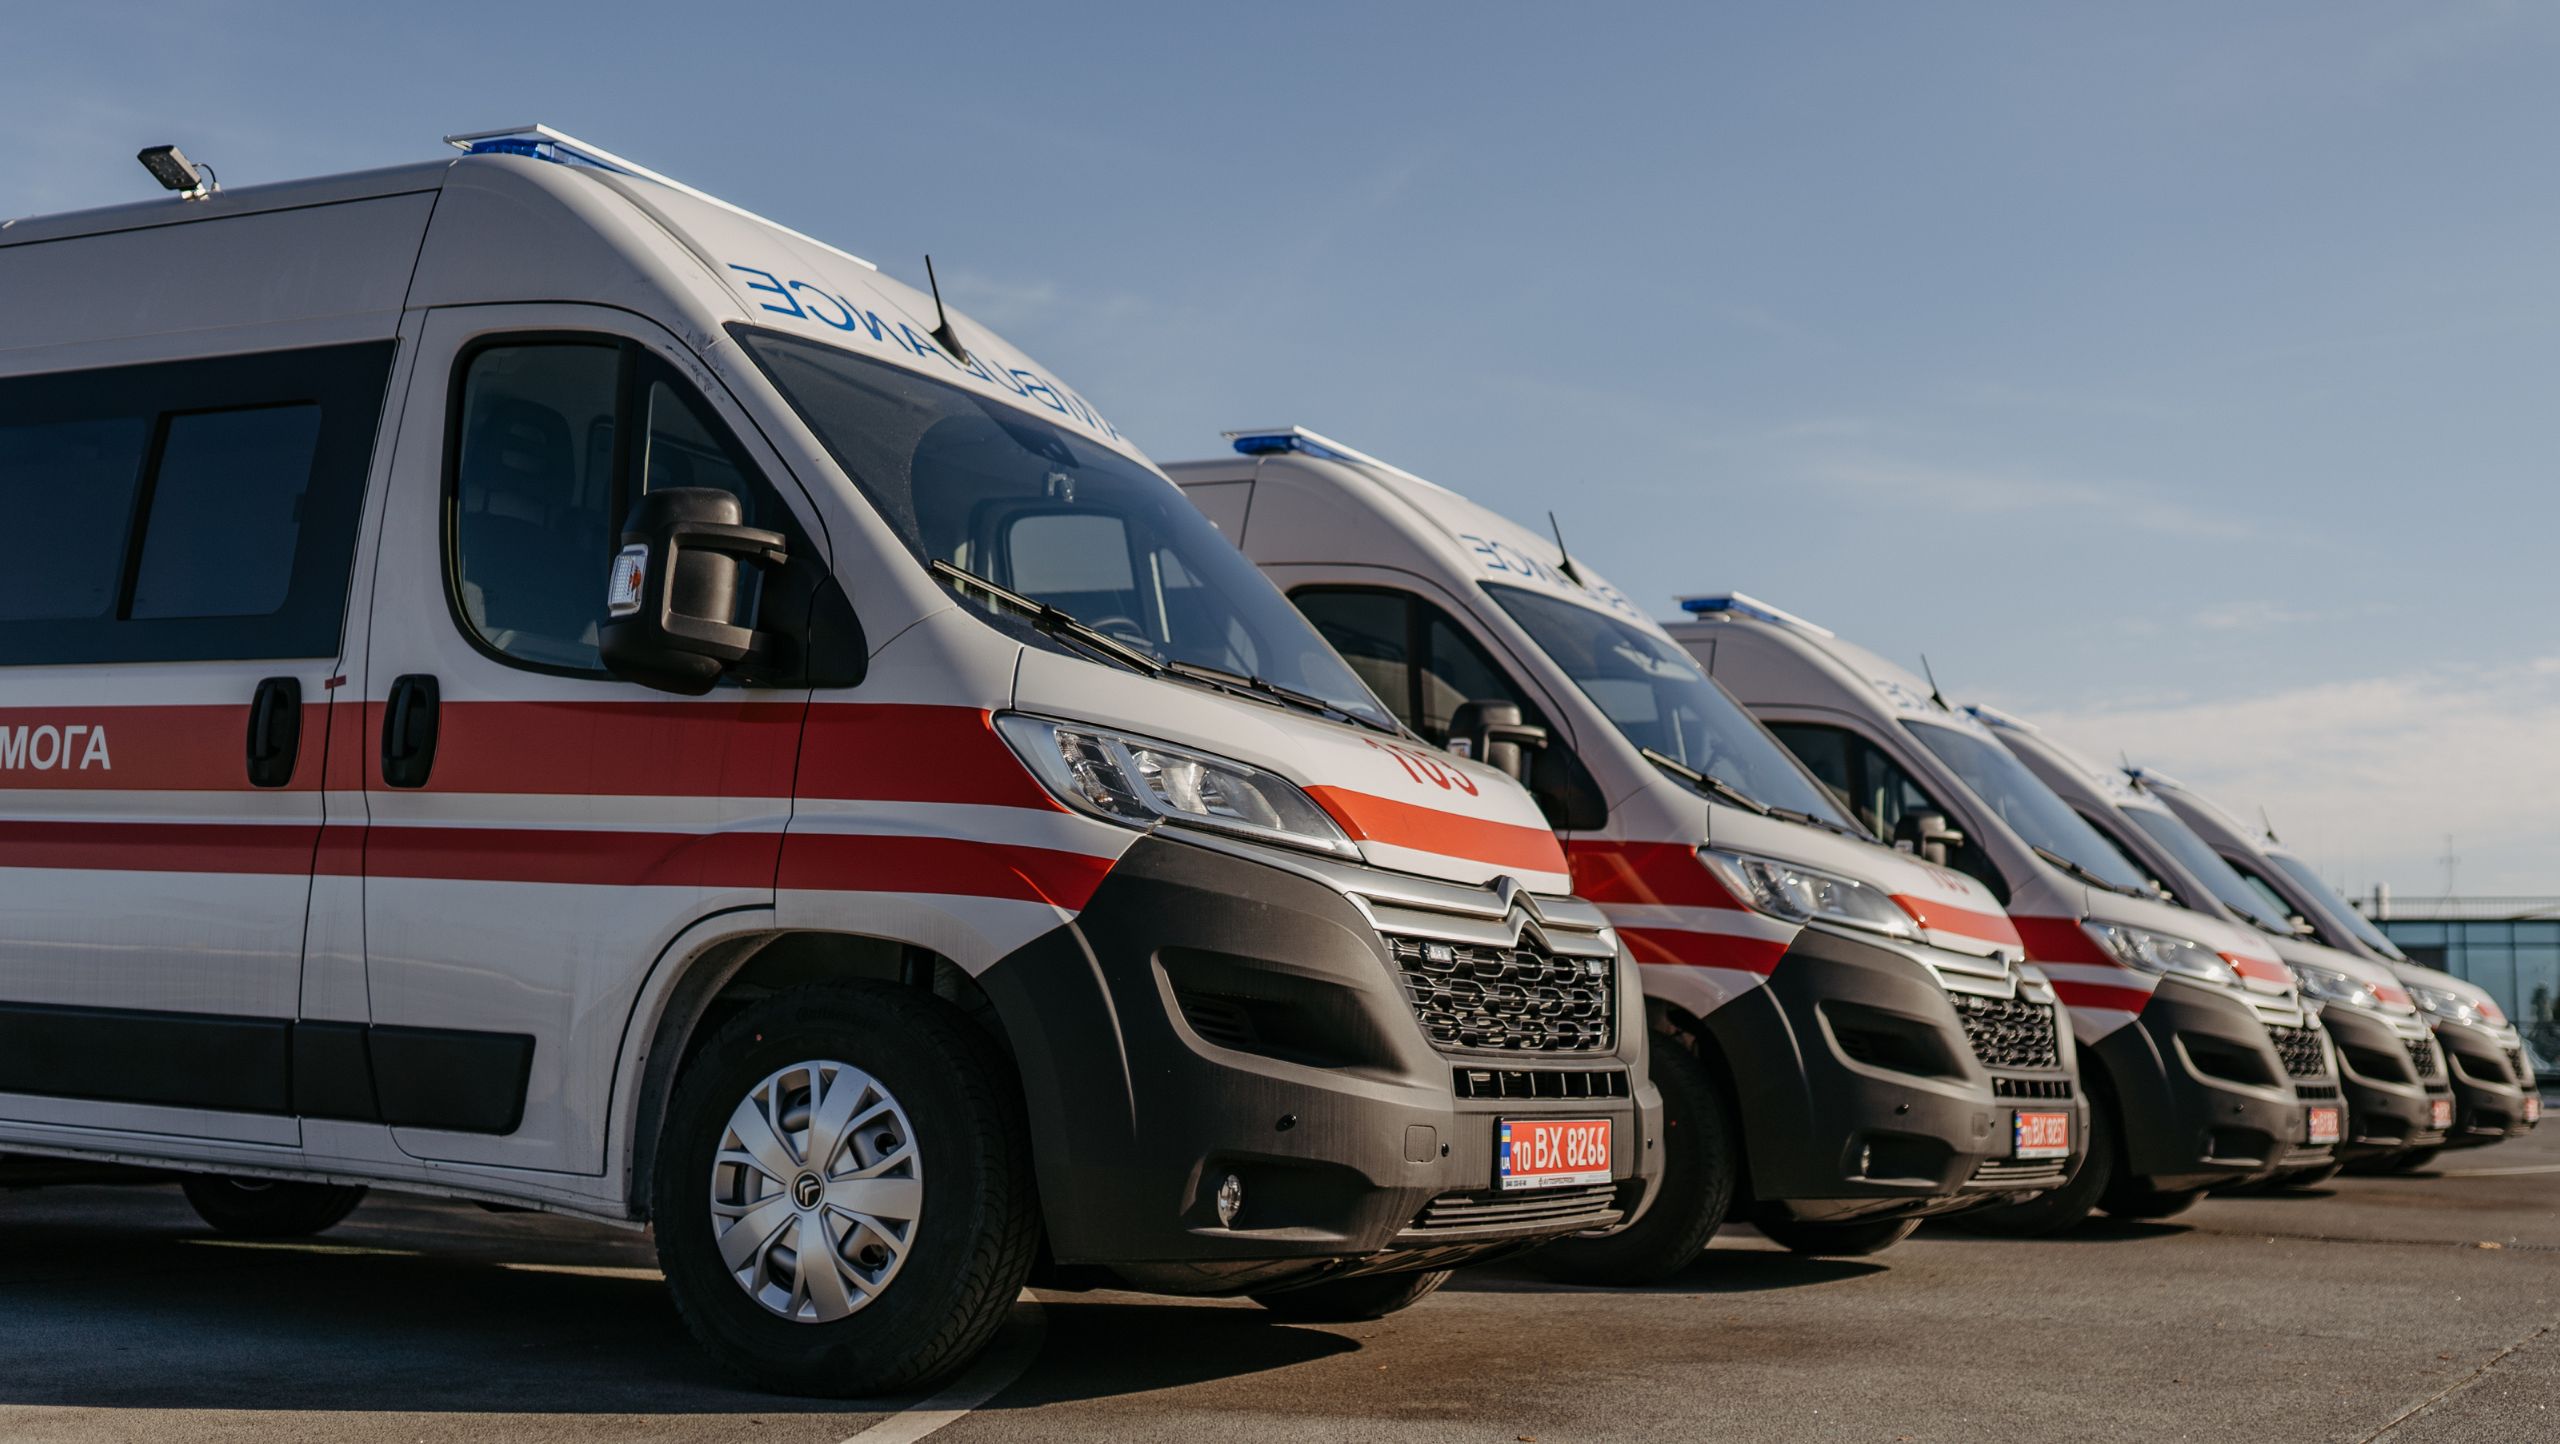 Grammarly, Together with UNITED24, has Already Raised Over $135,000 for C-type Ambulances